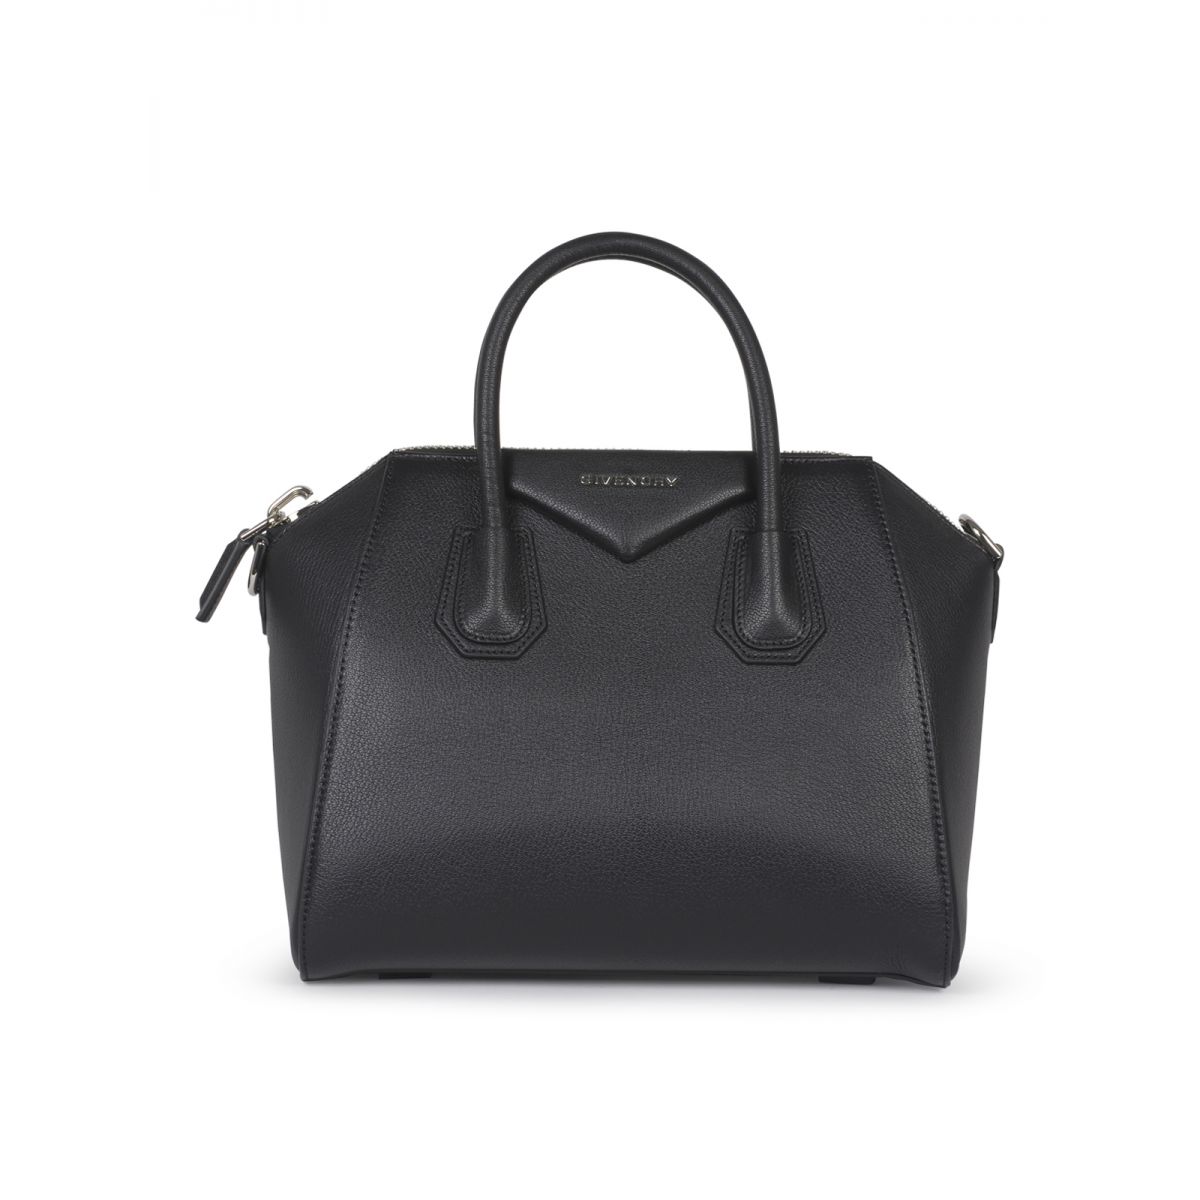 GIVENCHY - Small Antigona bag in grained leather